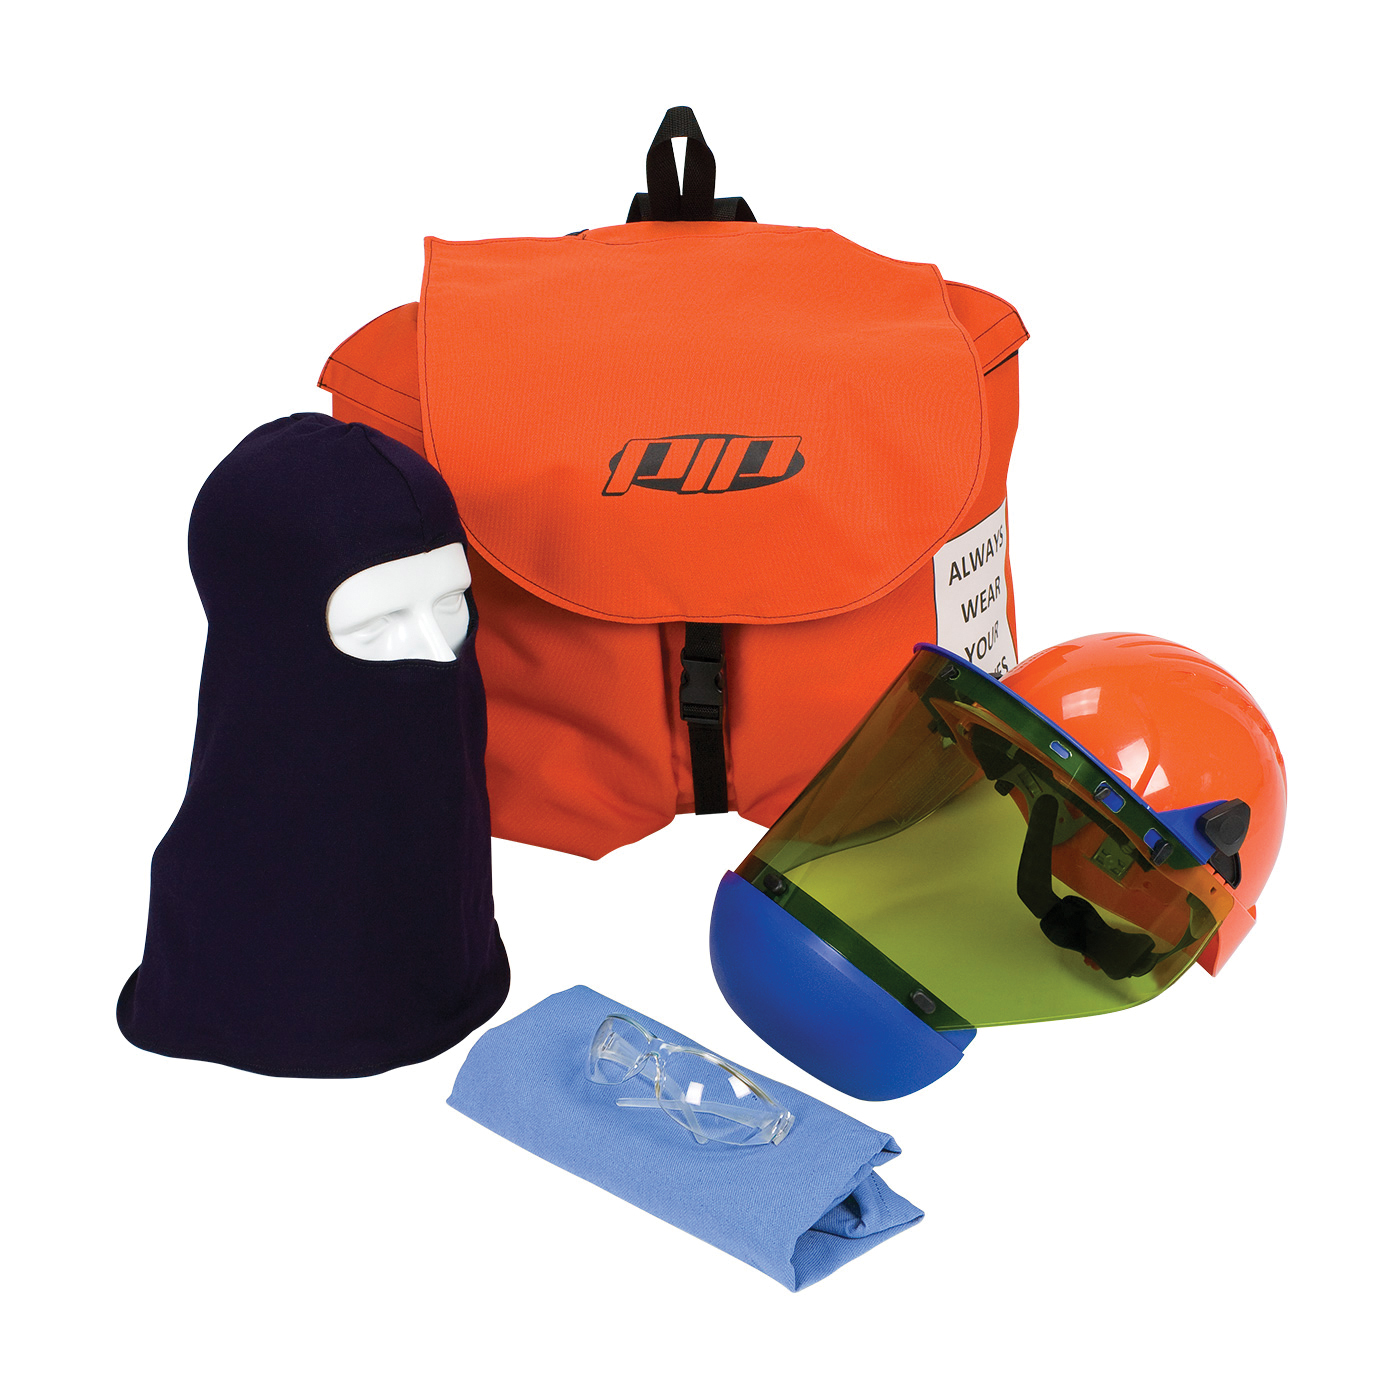 PIP® 9150-52500 Arc Flash Kit, Hazard Risk Category (HRC): 2, Hood/Face Shield Max Arc Flash Protection: 12 cal/sq-cm, Garment Max Arc Flash Protection: 12 cal/sq-cm, NFPA 70E-2018, Hard Hat Head/Face Protection, Universal